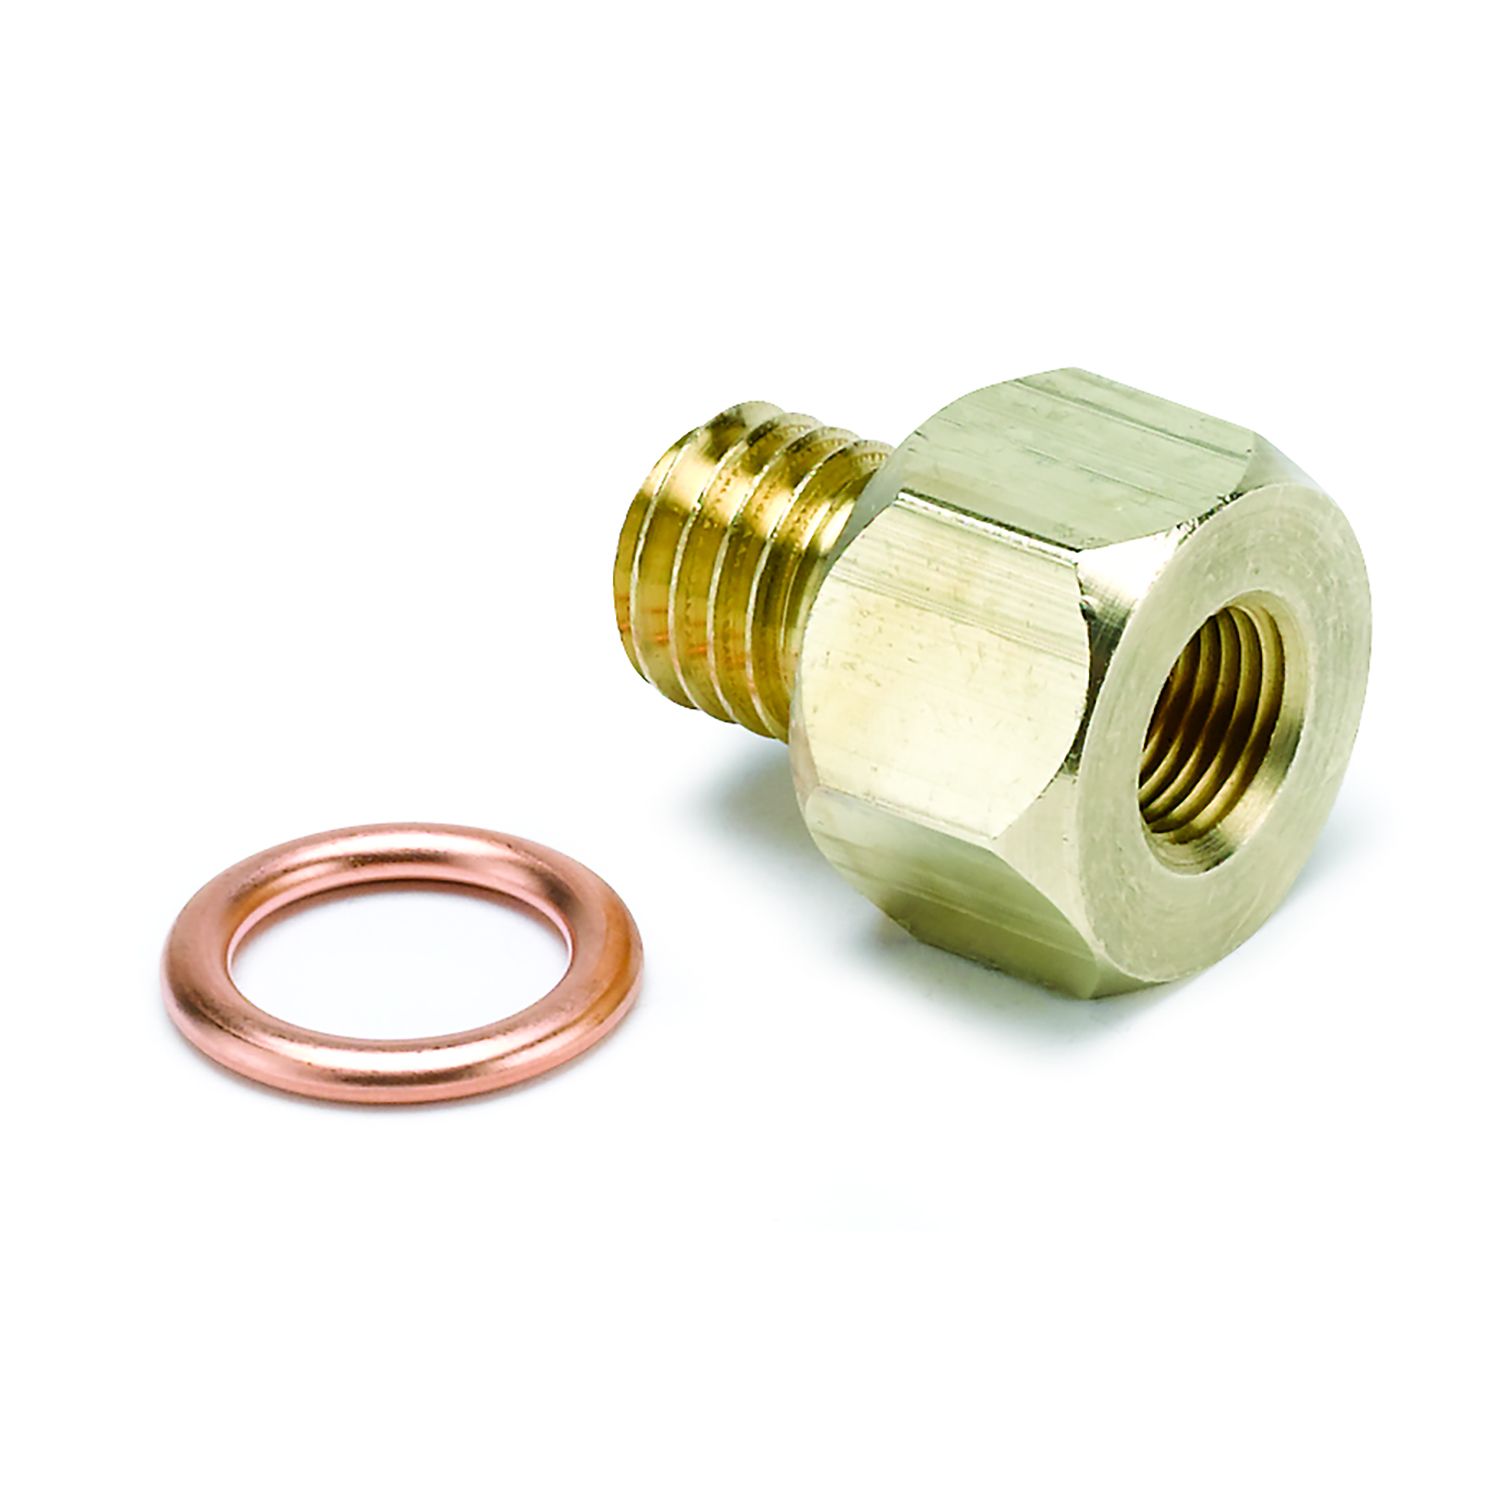 FITTING, ADAPTER, METRIC, M12X1.75 MALE TO 1/8 NPTF FEMALE, BRASS